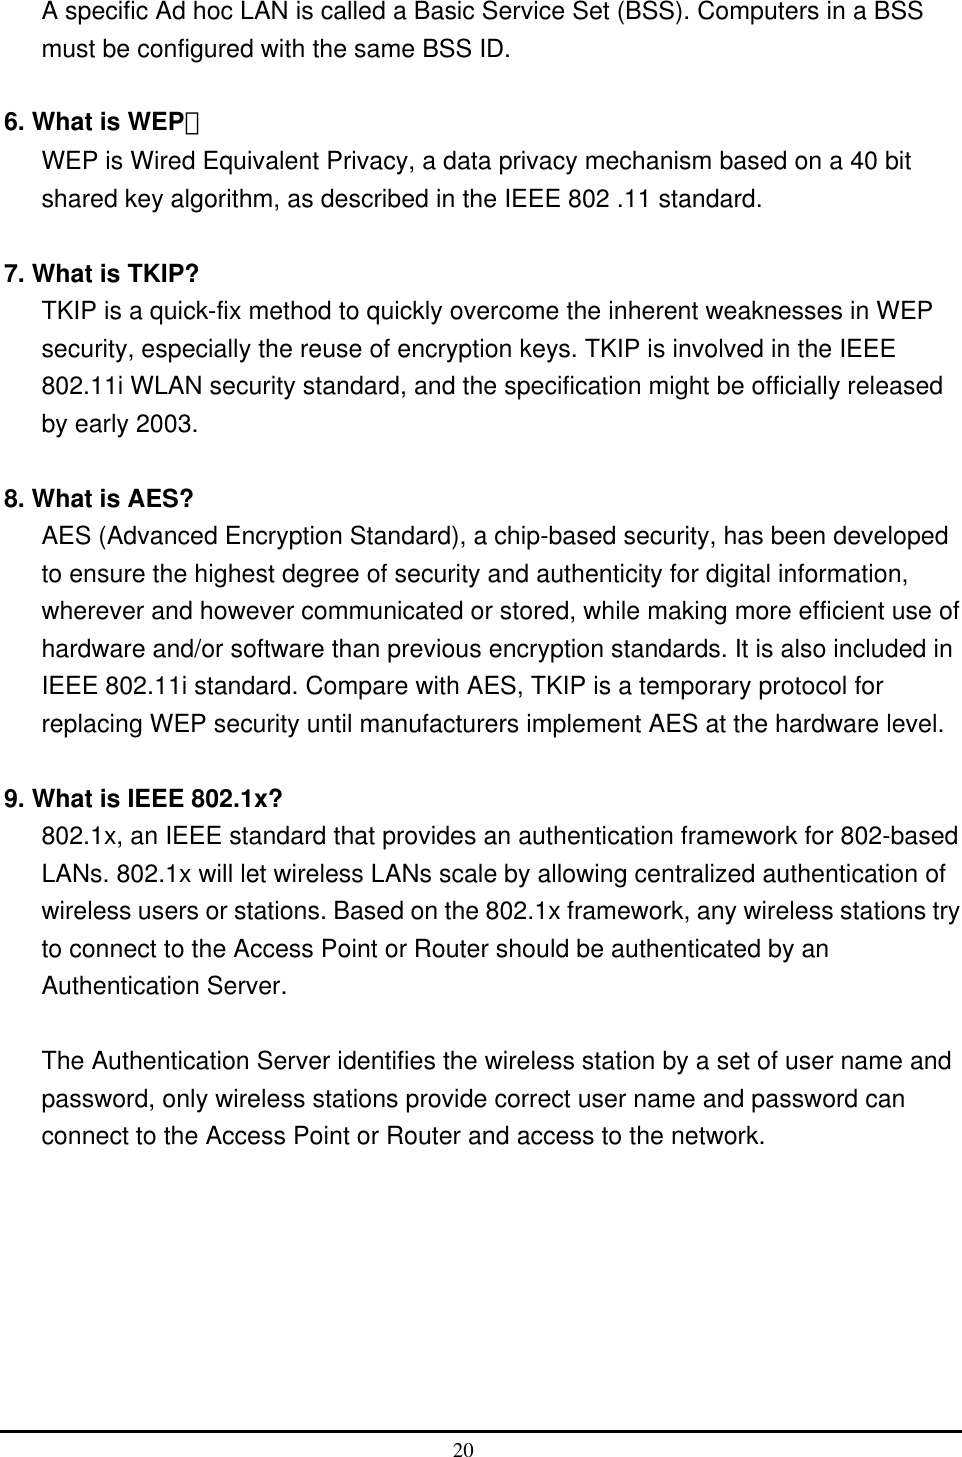  A specific Ad hoc LAN is called a Basic Service Set (BSS). Computers in a BSS must be configured with the same BSS ID.  6. What is WEP？ WEP is Wired Equivalent Privacy, a data privacy mechanism based on a 40 bit shared key algorithm, as described in the IEEE 802 .11 standard.  7. What is TKIP? TKIP is a quick-fix method to quickly overcome the inherent weaknesses in WEP security, especially the reuse of encryption keys. TKIP is involved in the IEEE 802.11i WLAN security standard, and the specification might be officially released by early 2003.  8. What is AES? AES (Advanced Encryption Standard), a chip-based security, has been developed to ensure the highest degree of security and authenticity for digital information, wherever and however communicated or stored, while making more efficient use of hardware and/or software than previous encryption standards. It is also included in IEEE 802.11i standard. Compare with AES, TKIP is a temporary protocol for replacing WEP security until manufacturers implement AES at the hardware level.  9. What is IEEE 802.1x? 802.1x, an IEEE standard that provides an authentication framework for 802-based LANs. 802.1x will let wireless LANs scale by allowing centralized authentication of wireless users or stations. Based on the 802.1x framework, any wireless stations try to connect to the Access Point or Router should be authenticated by an Authentication Server.  The Authentication Server identifies the wireless station by a set of user name and password, only wireless stations provide correct user name and password can connect to the Access Point or Router and access to the network. 20  